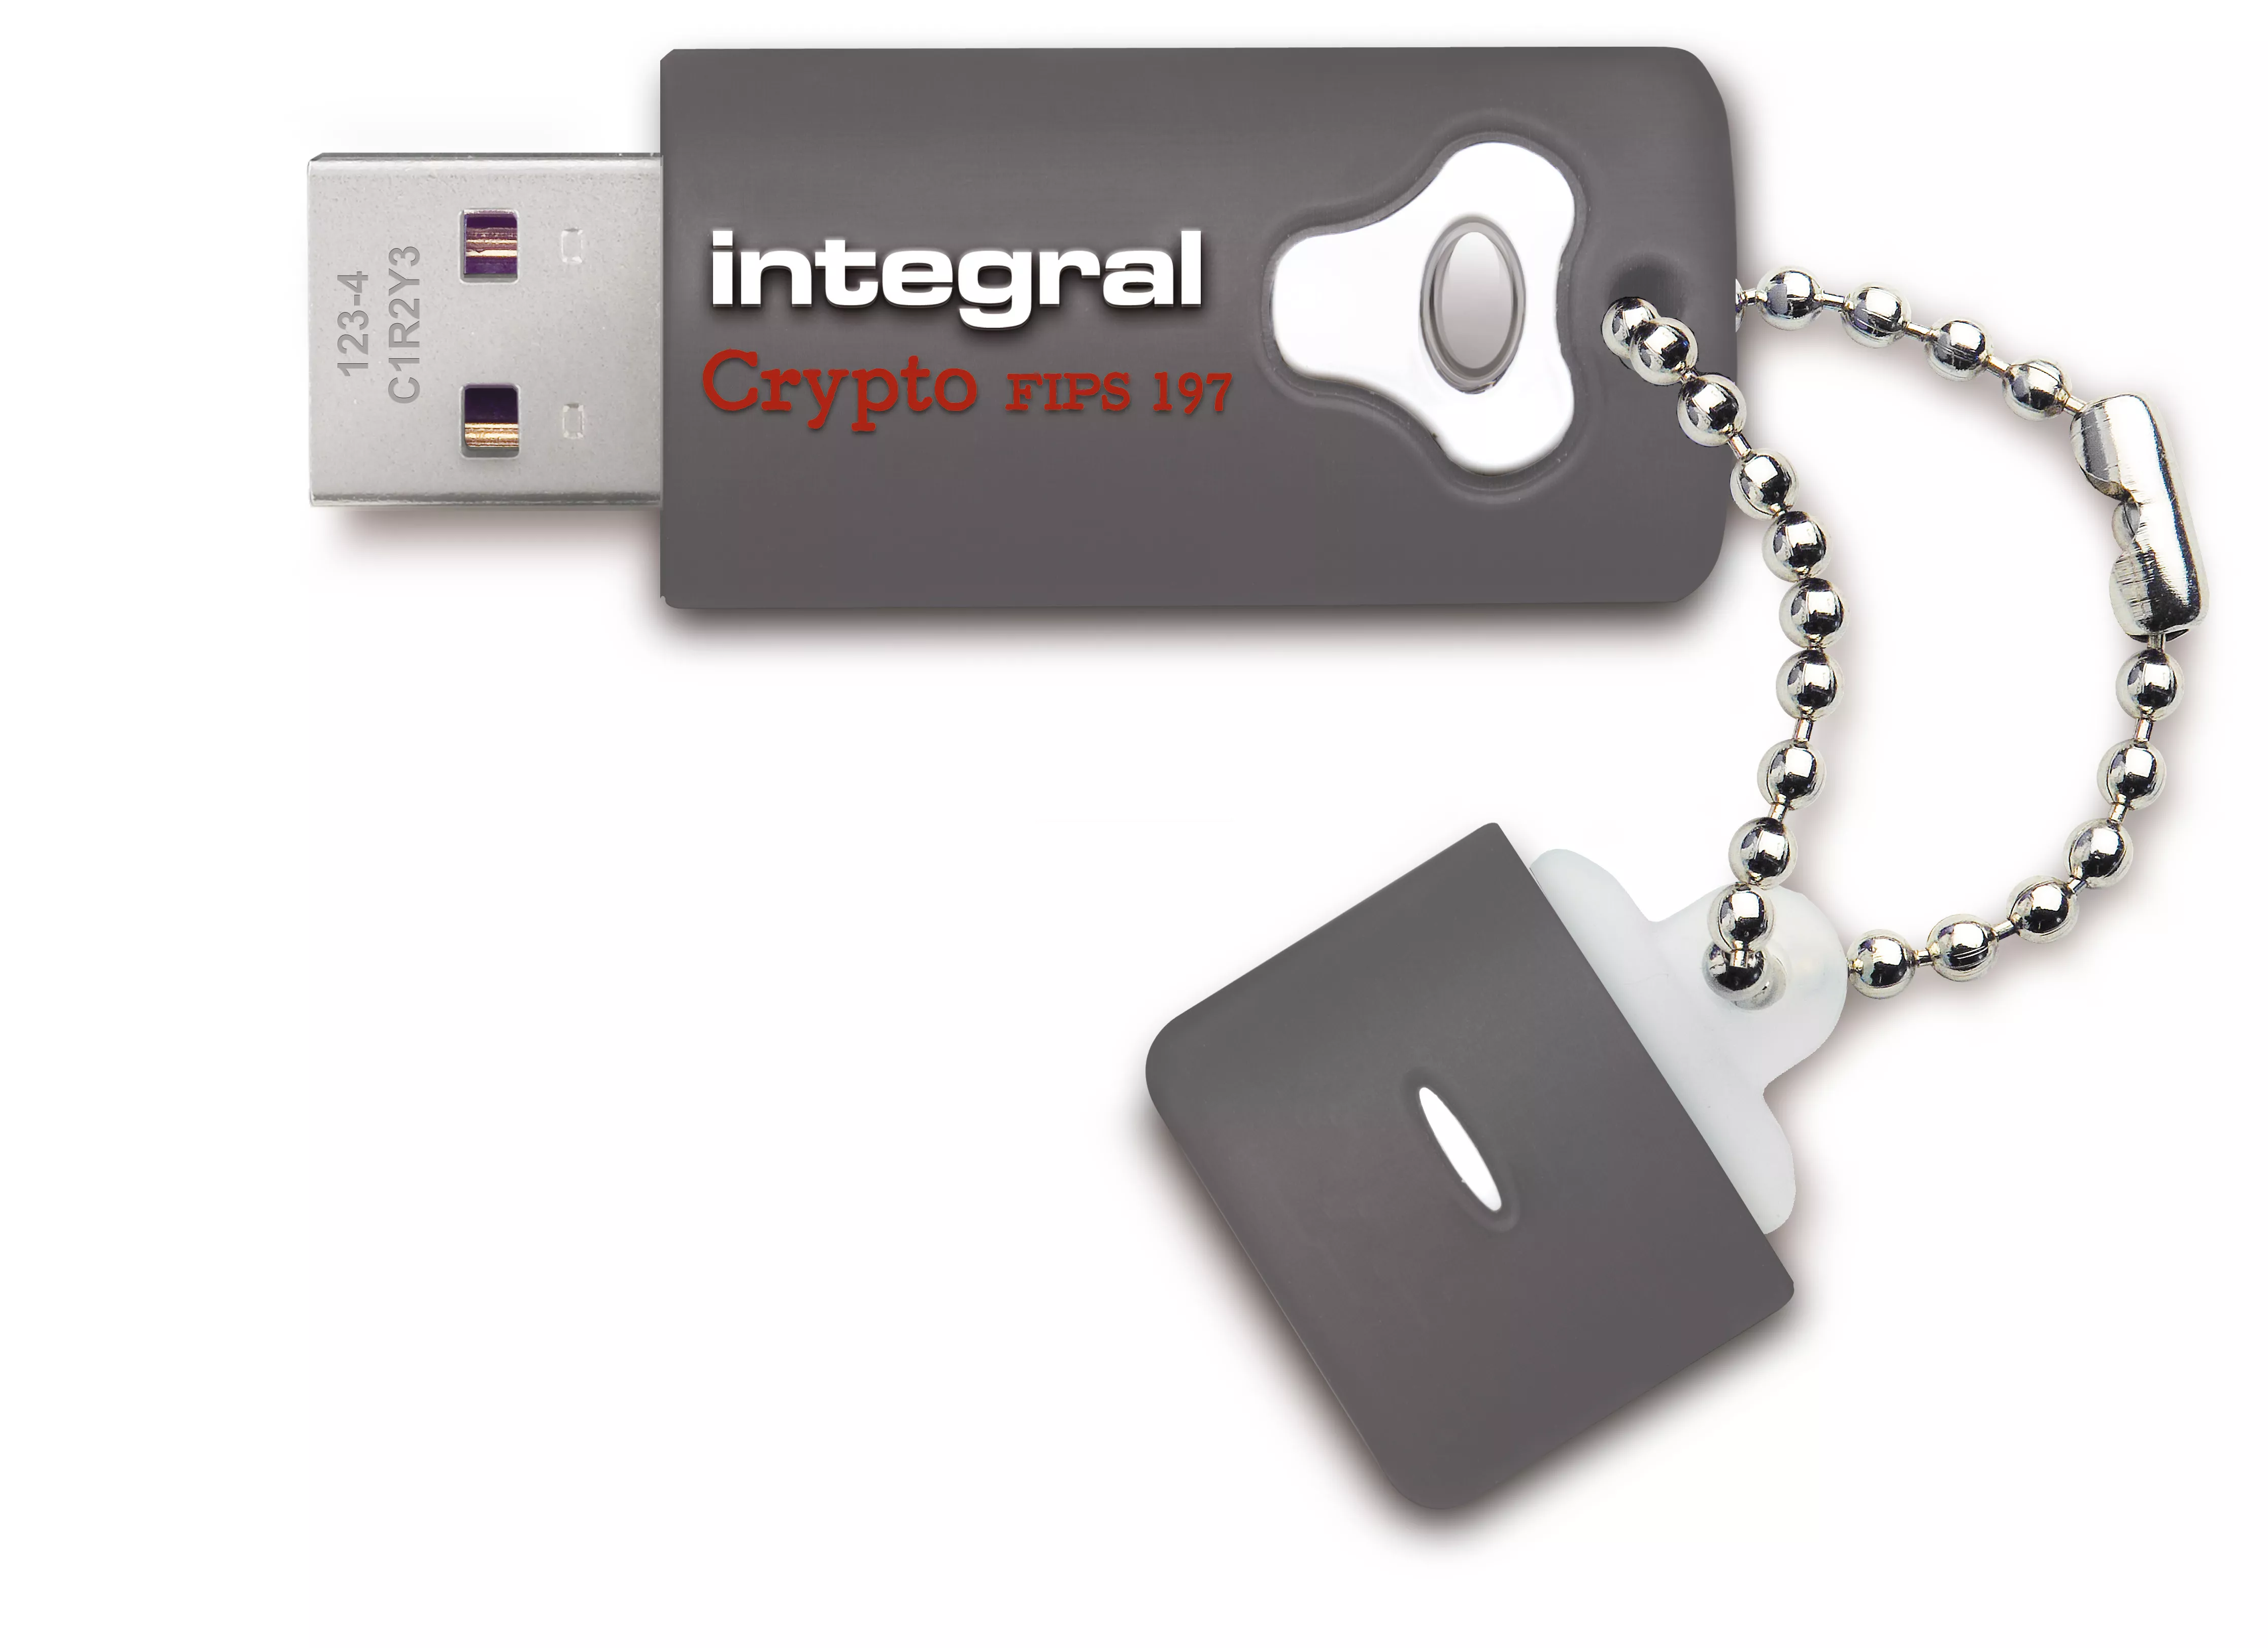 Achat Adaptateur stockage Integral 16GB Crypto Drive FIPS 197 Encrypted USB 3.0 sur hello RSE